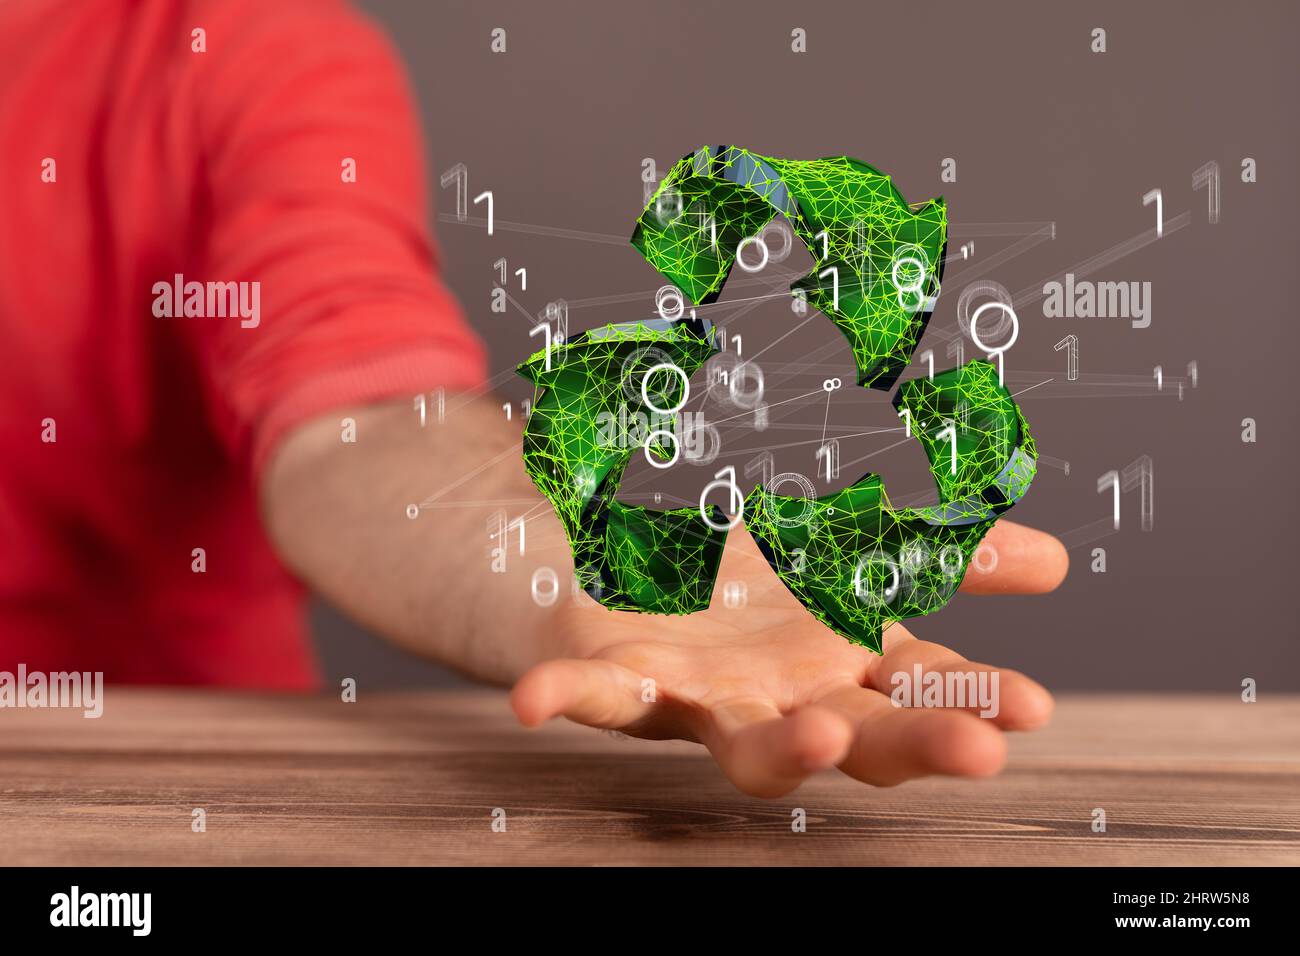 Illustration of a hand holding planet earth recycle sign Stock Photo